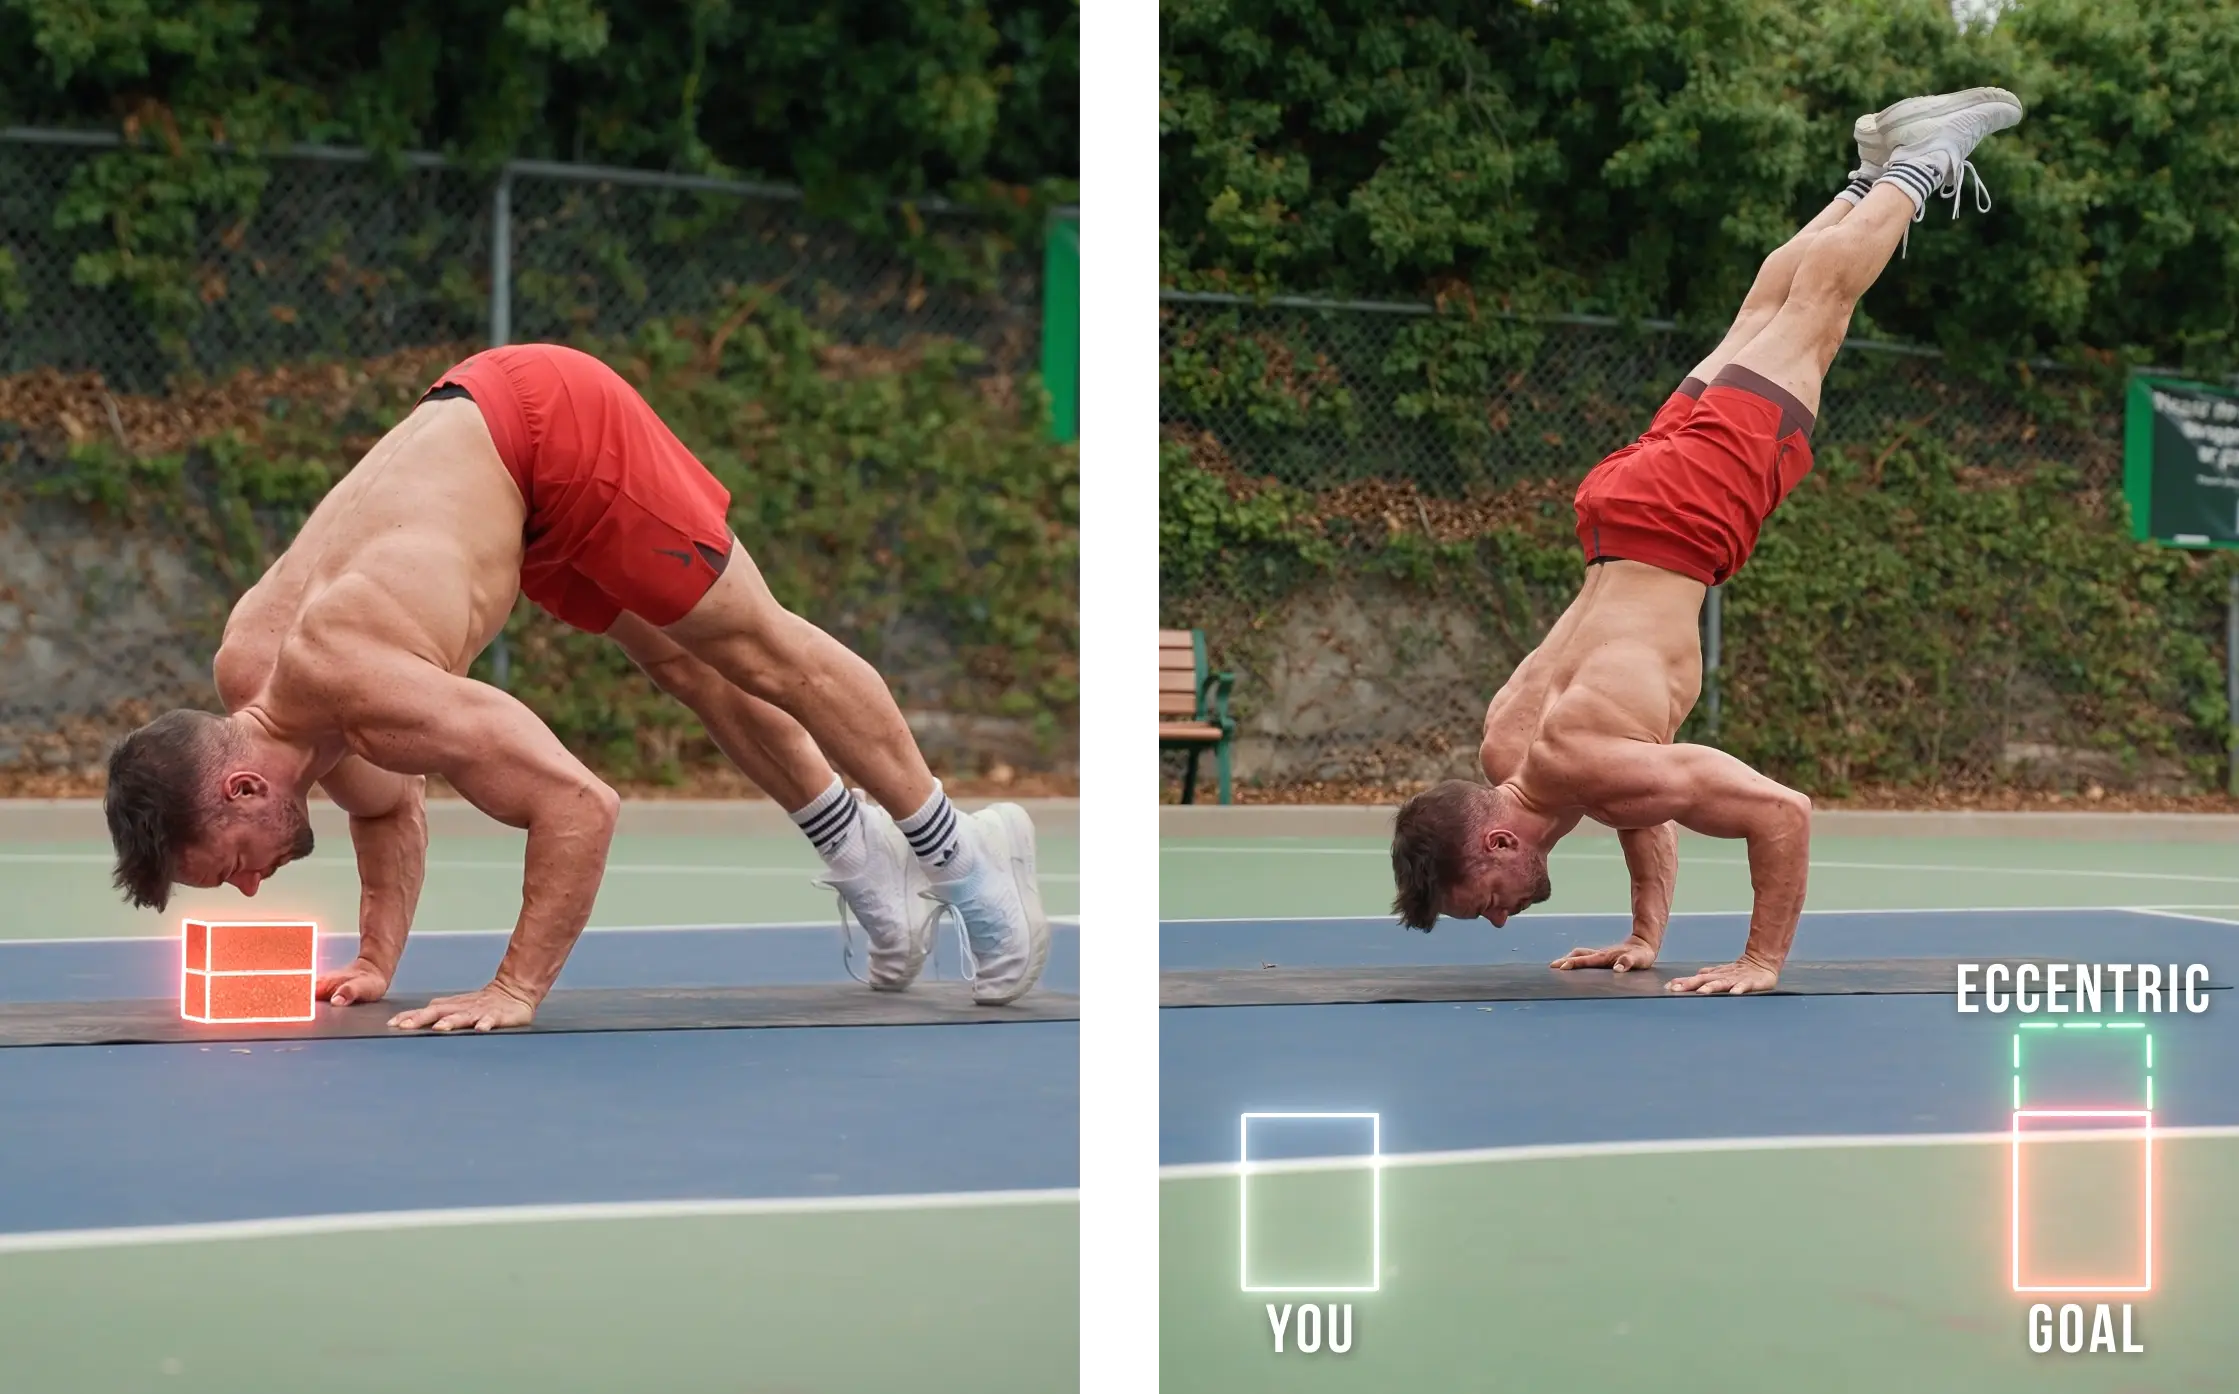 How To HANDSTAND PUSH UP For Beginners - HSPU Tutorial 